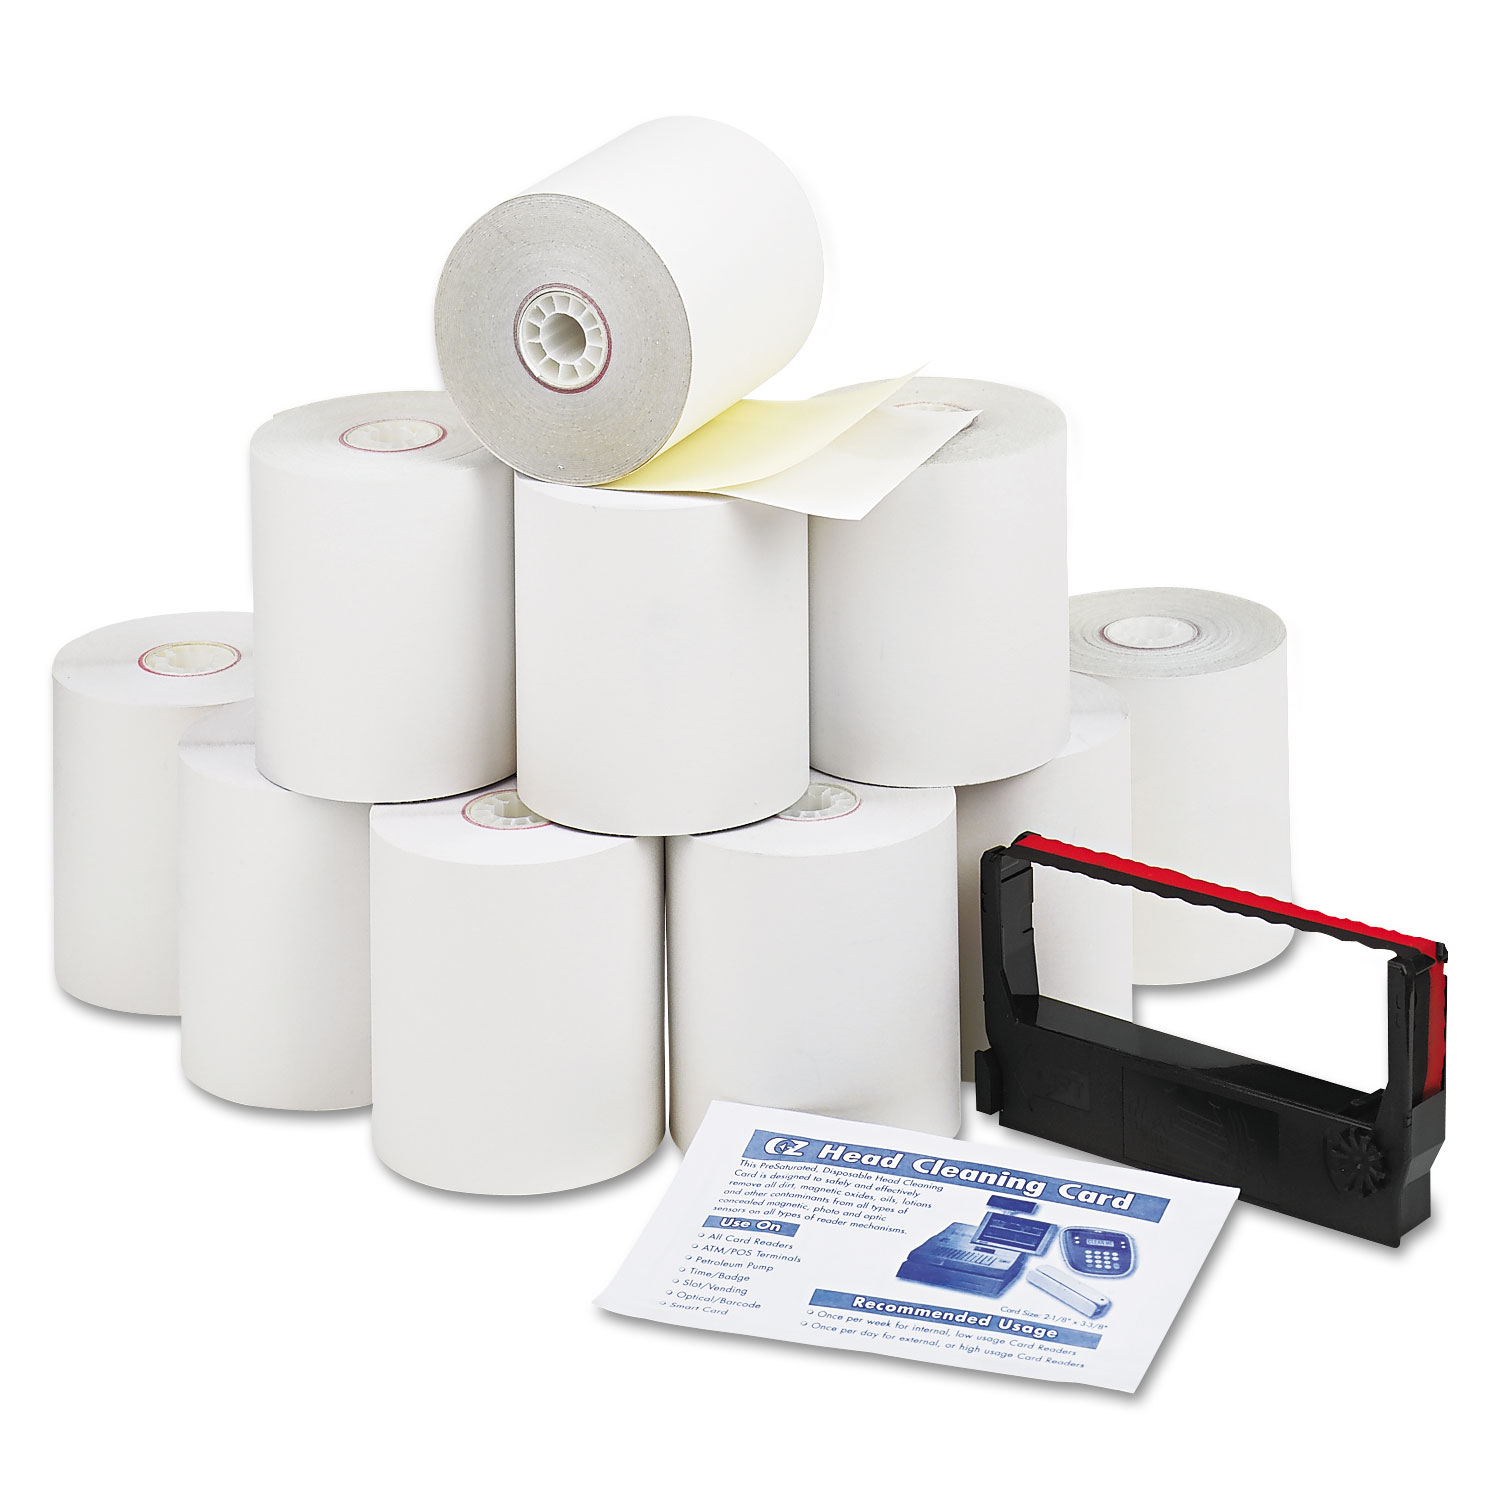  Iconex 9300 Impact Printing Carbonless Paper Rolls, 3 x 90 ft, White/Canary, 10/Pack (ICX90771000) 